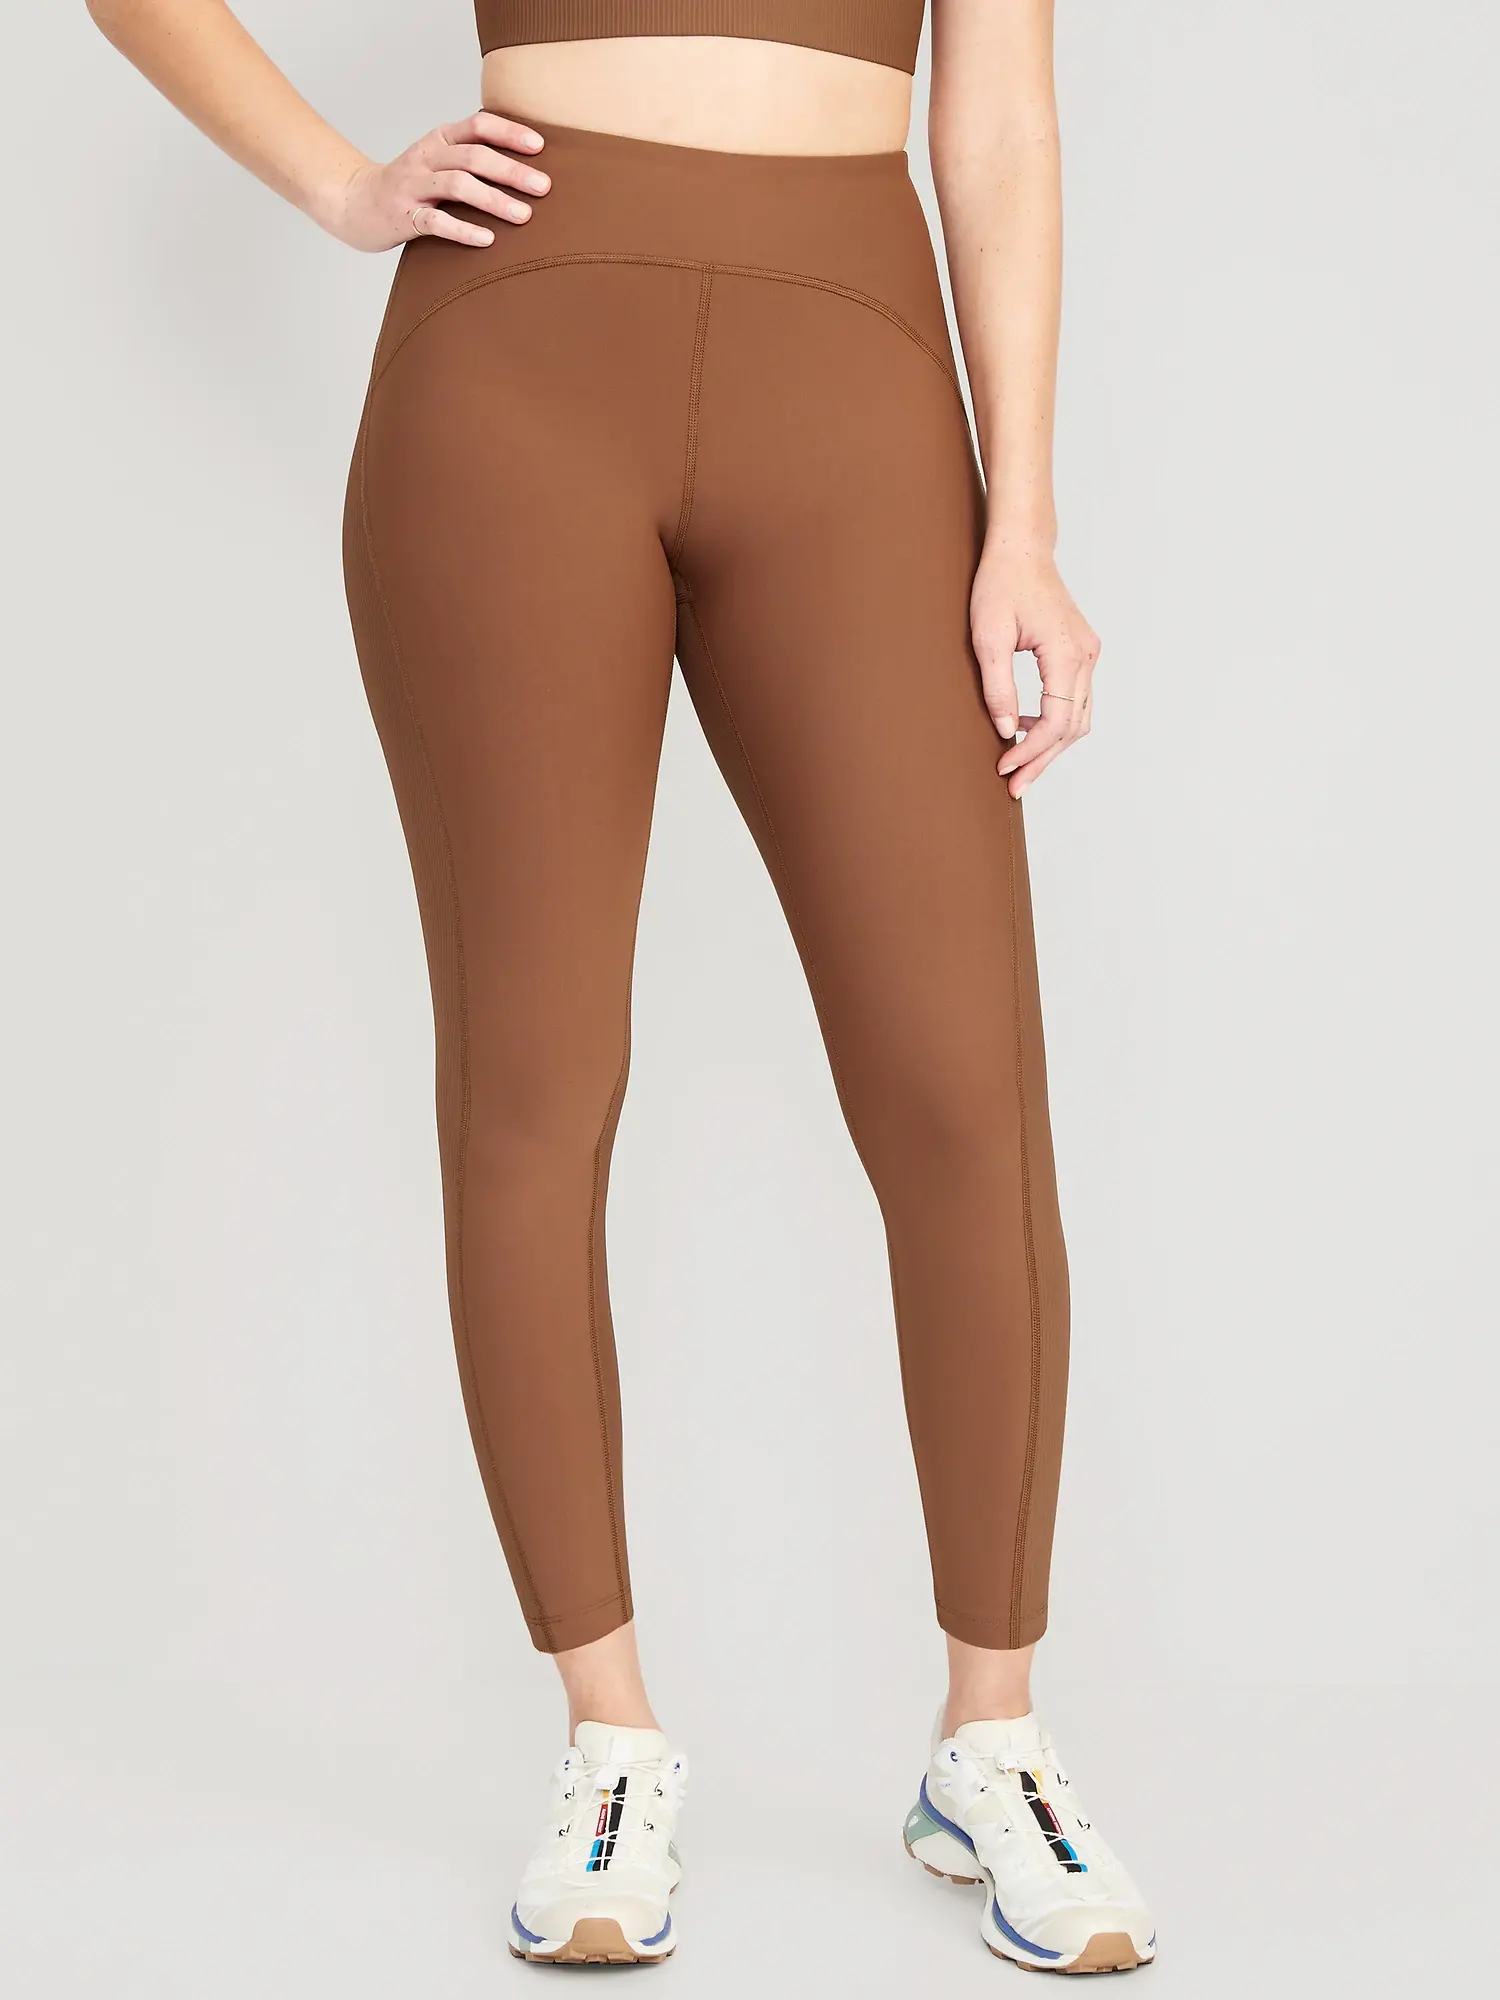 Old Navy High-Waisted PowerSoft 7/8 Leggings brown. 1